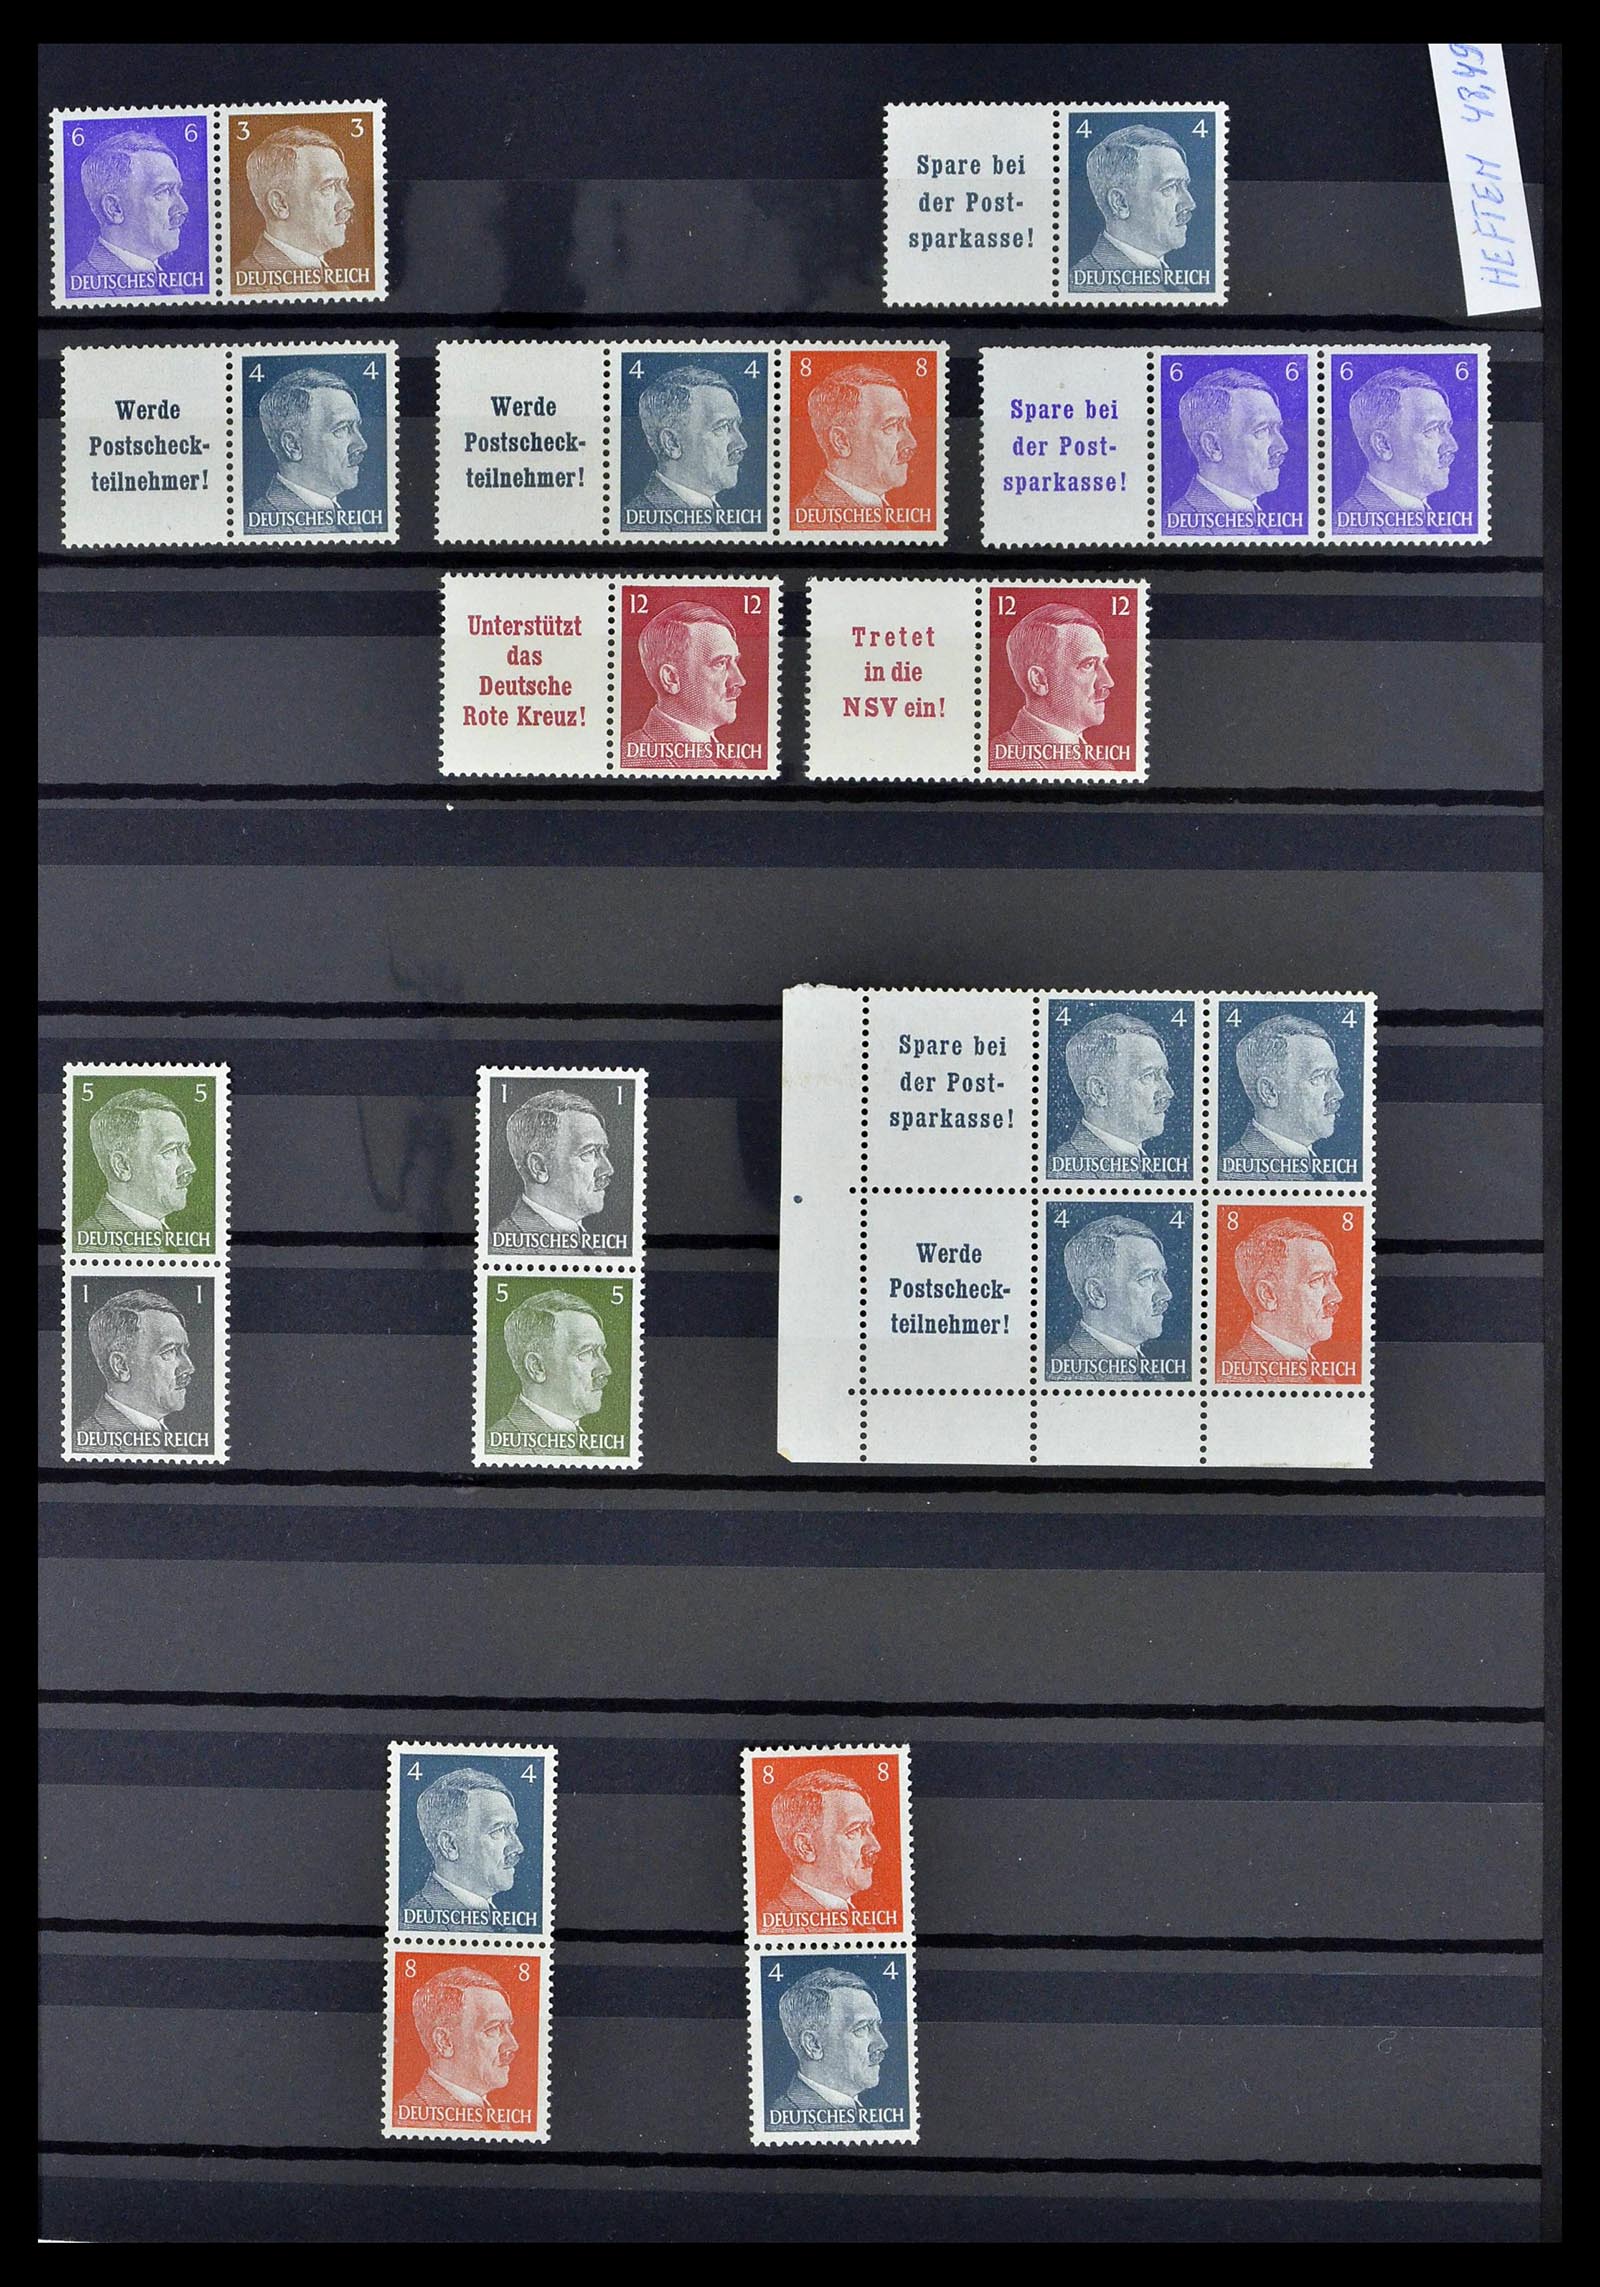 39311 0038 - Stamp collection 39311 German Reich combinations 1910-1941.